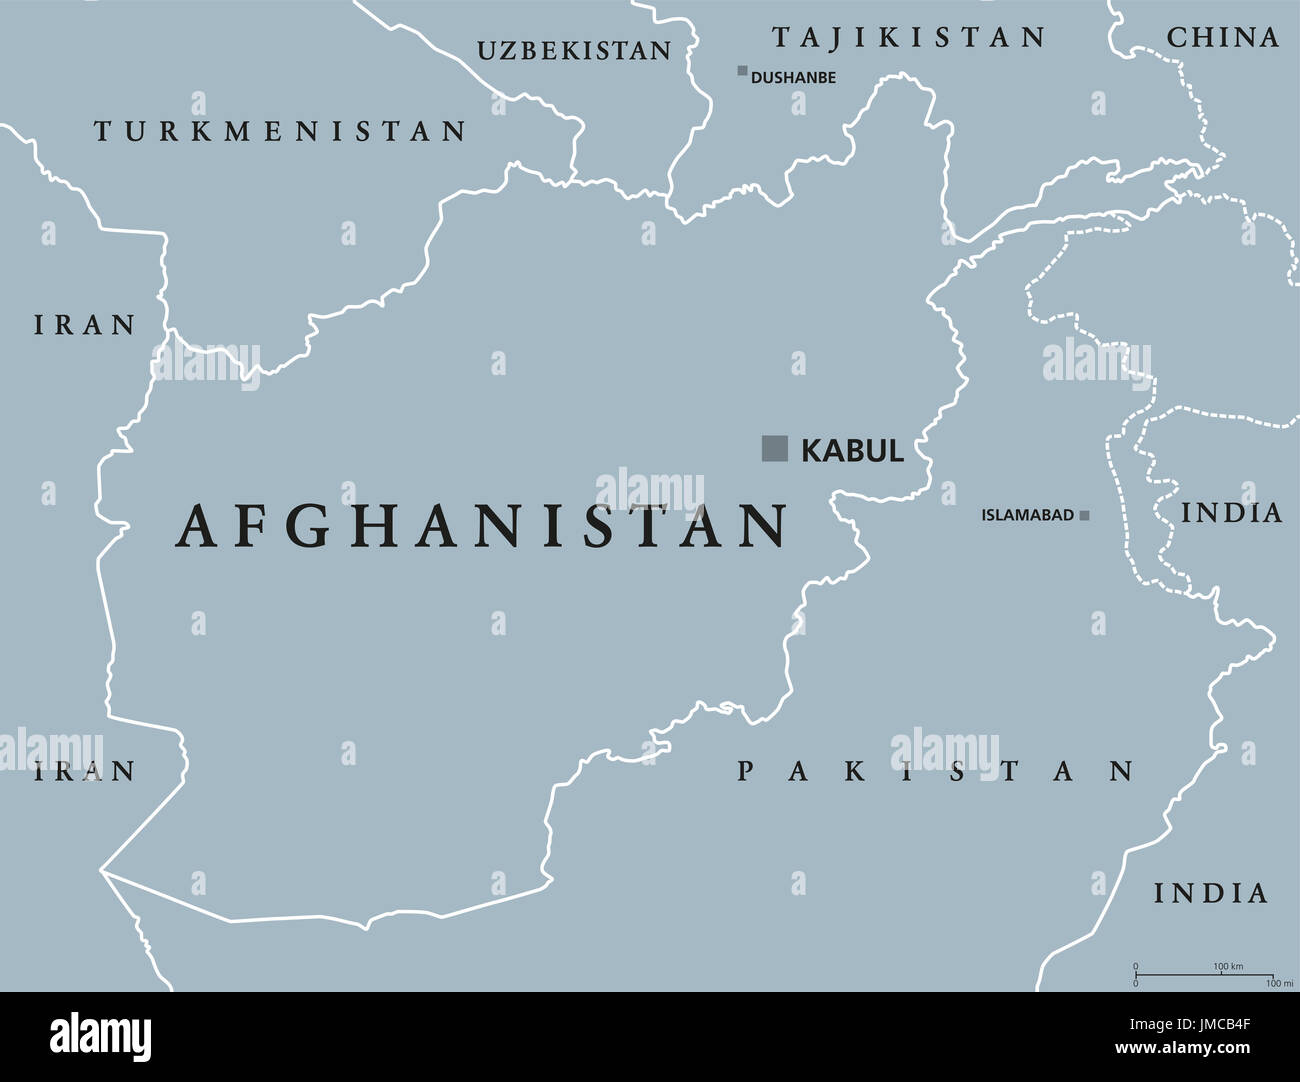 Afghanistan political map with capital Kabul and borders. Islamic Republic and landlocked country in South and Central Asia. Gray illustration. Stock Photo